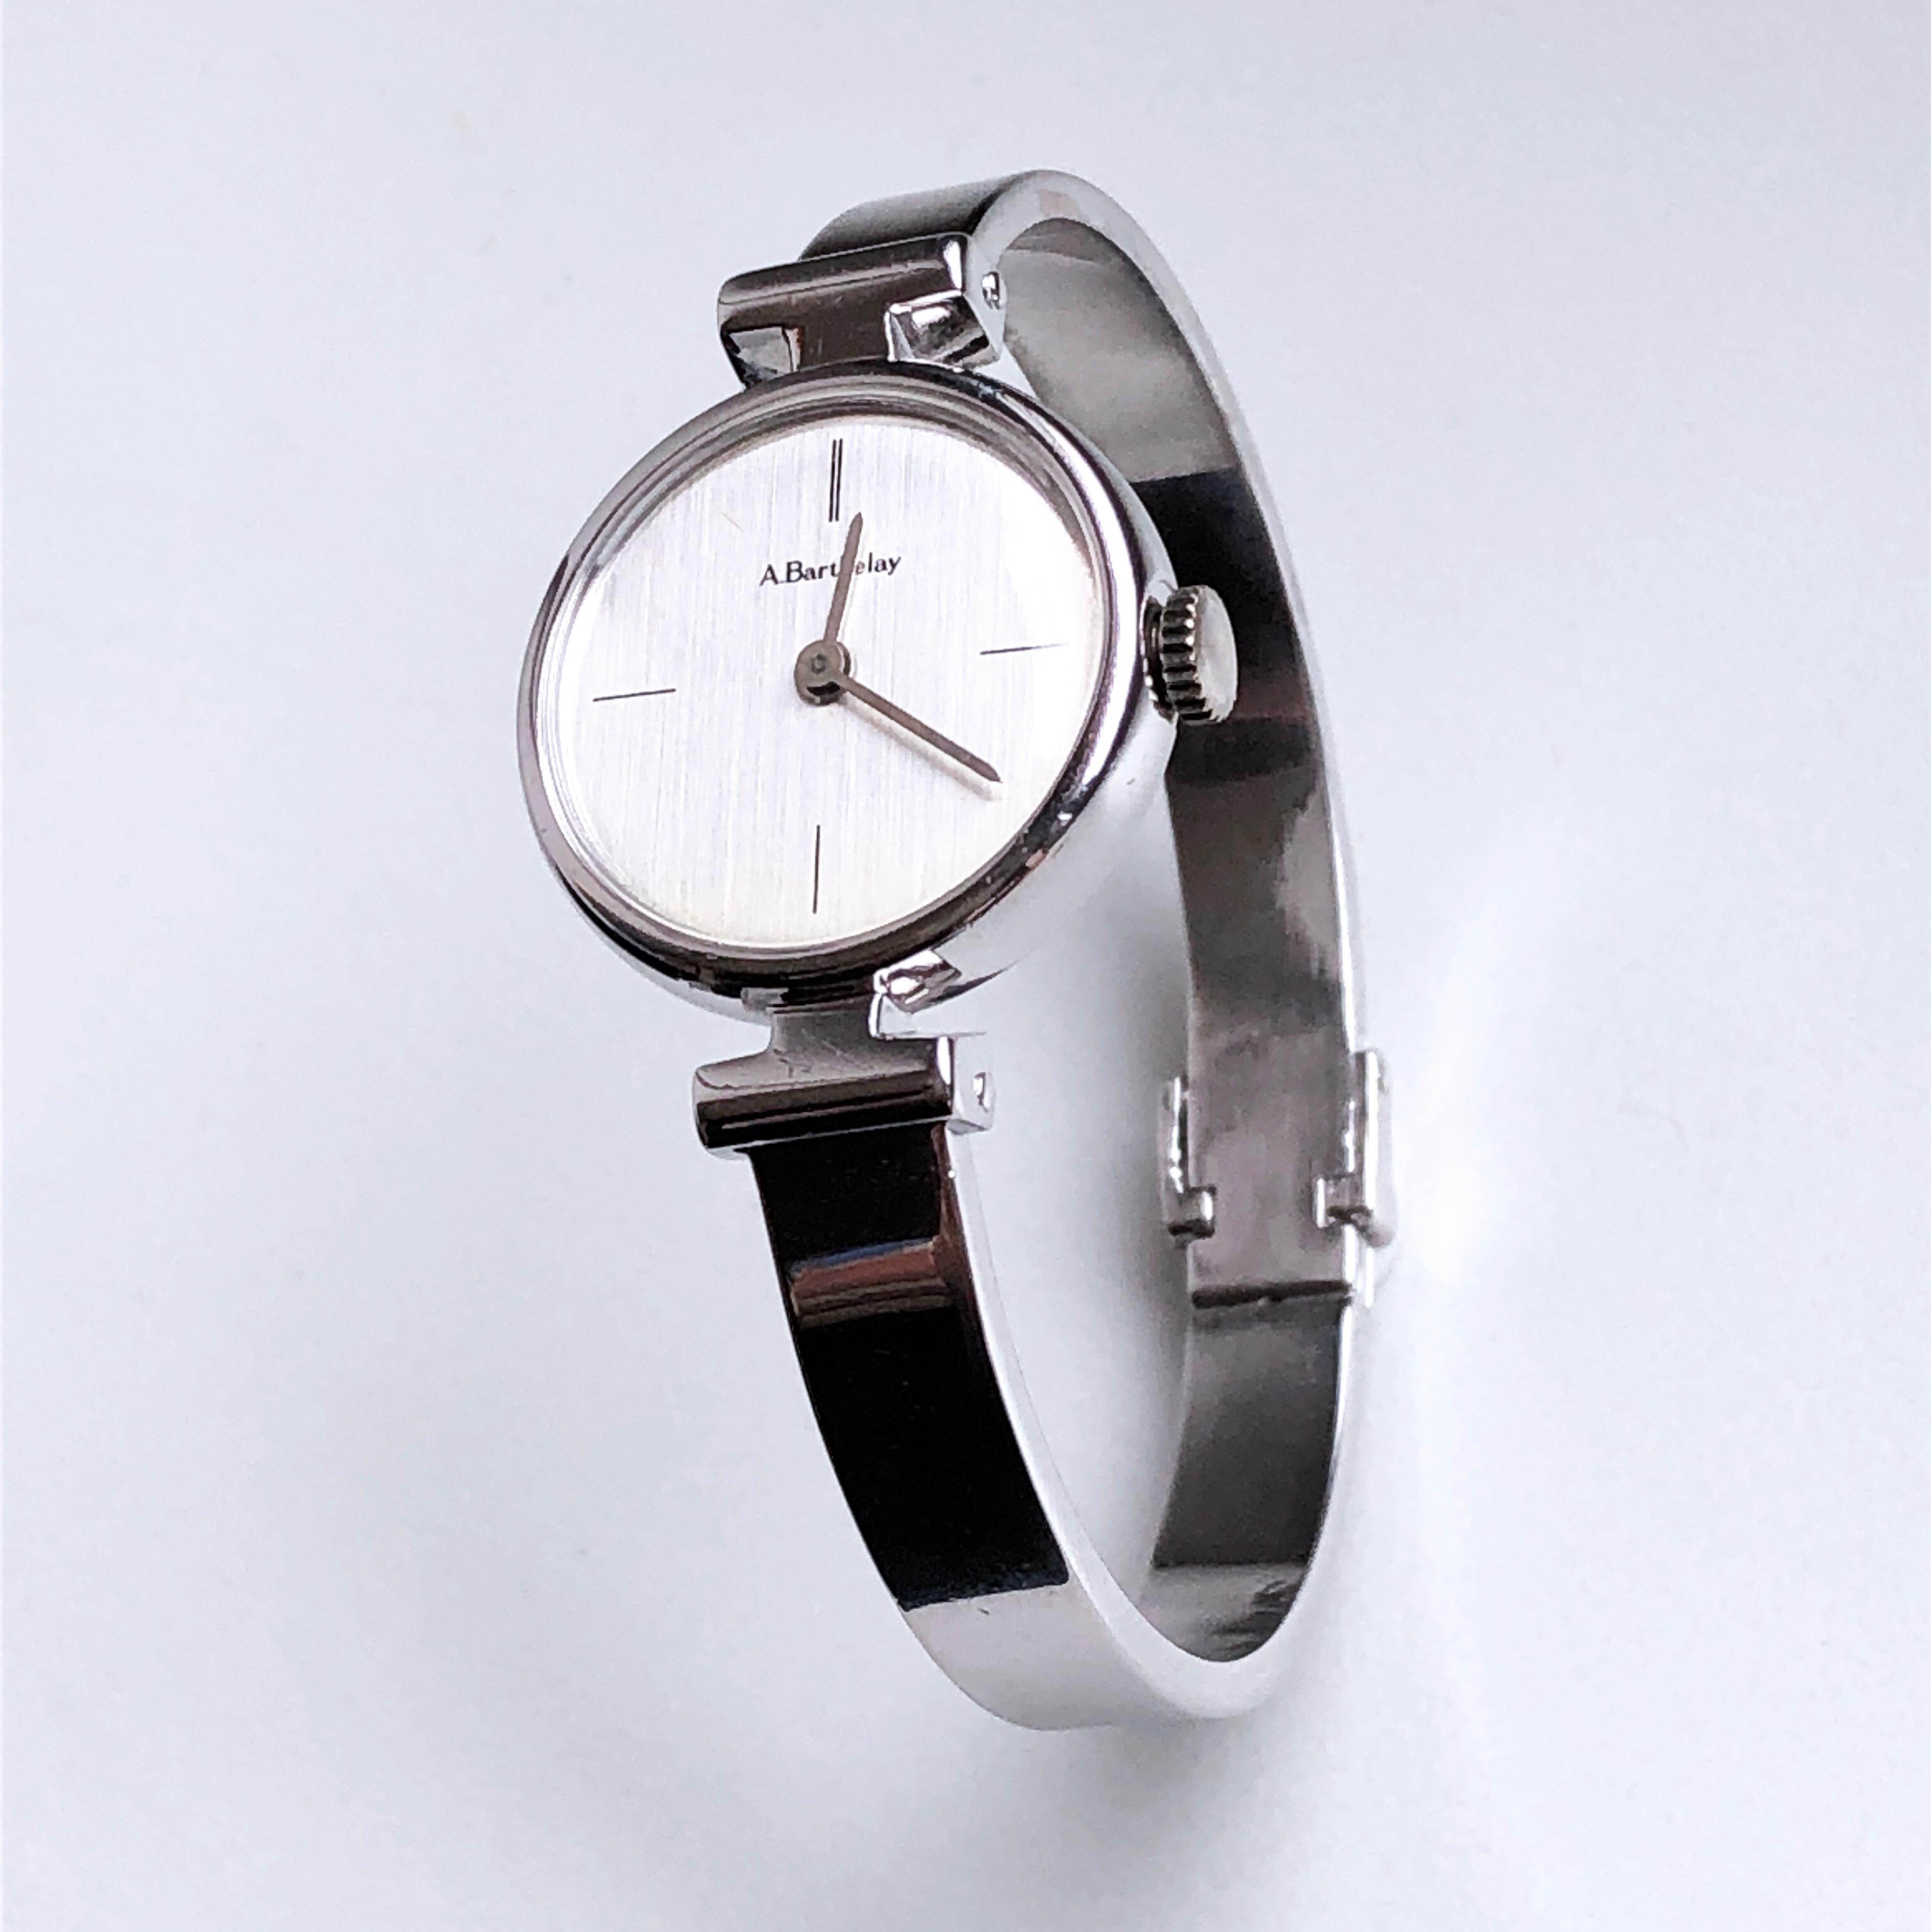 Original 1974, Exquisite Alexis Barthelay Watch, a special piece characterized by an elegant, unique, absolutely chic yet timeless design.
This iconic watch is fully functional, in excellent, perfect condition with no traces of wear; it is perfect